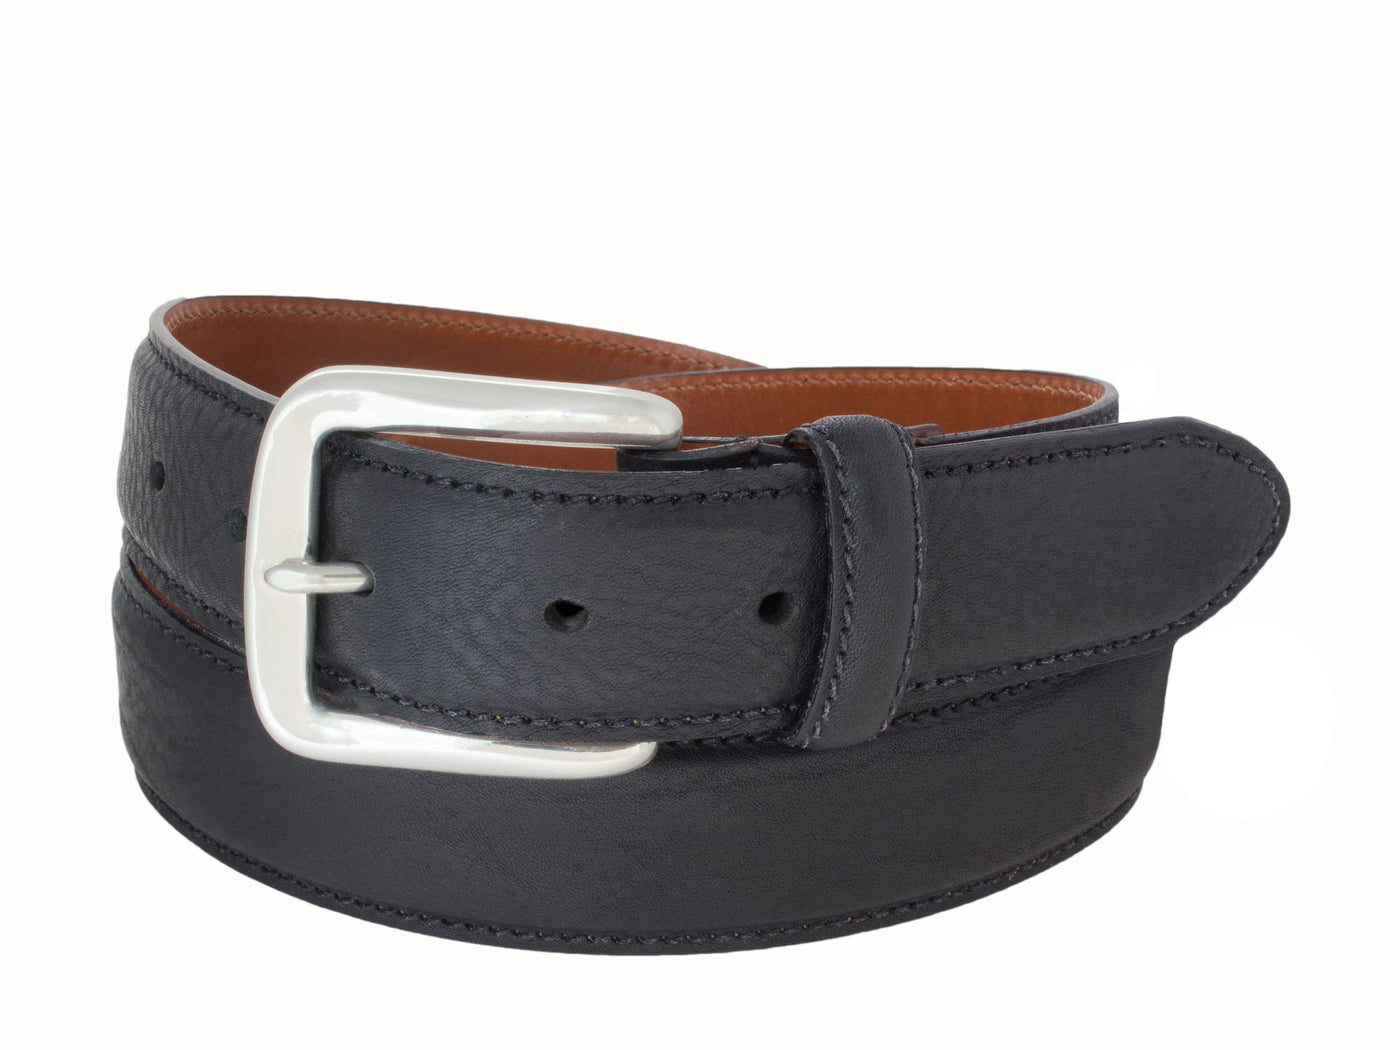 Leather belt TUCKER made in Italy